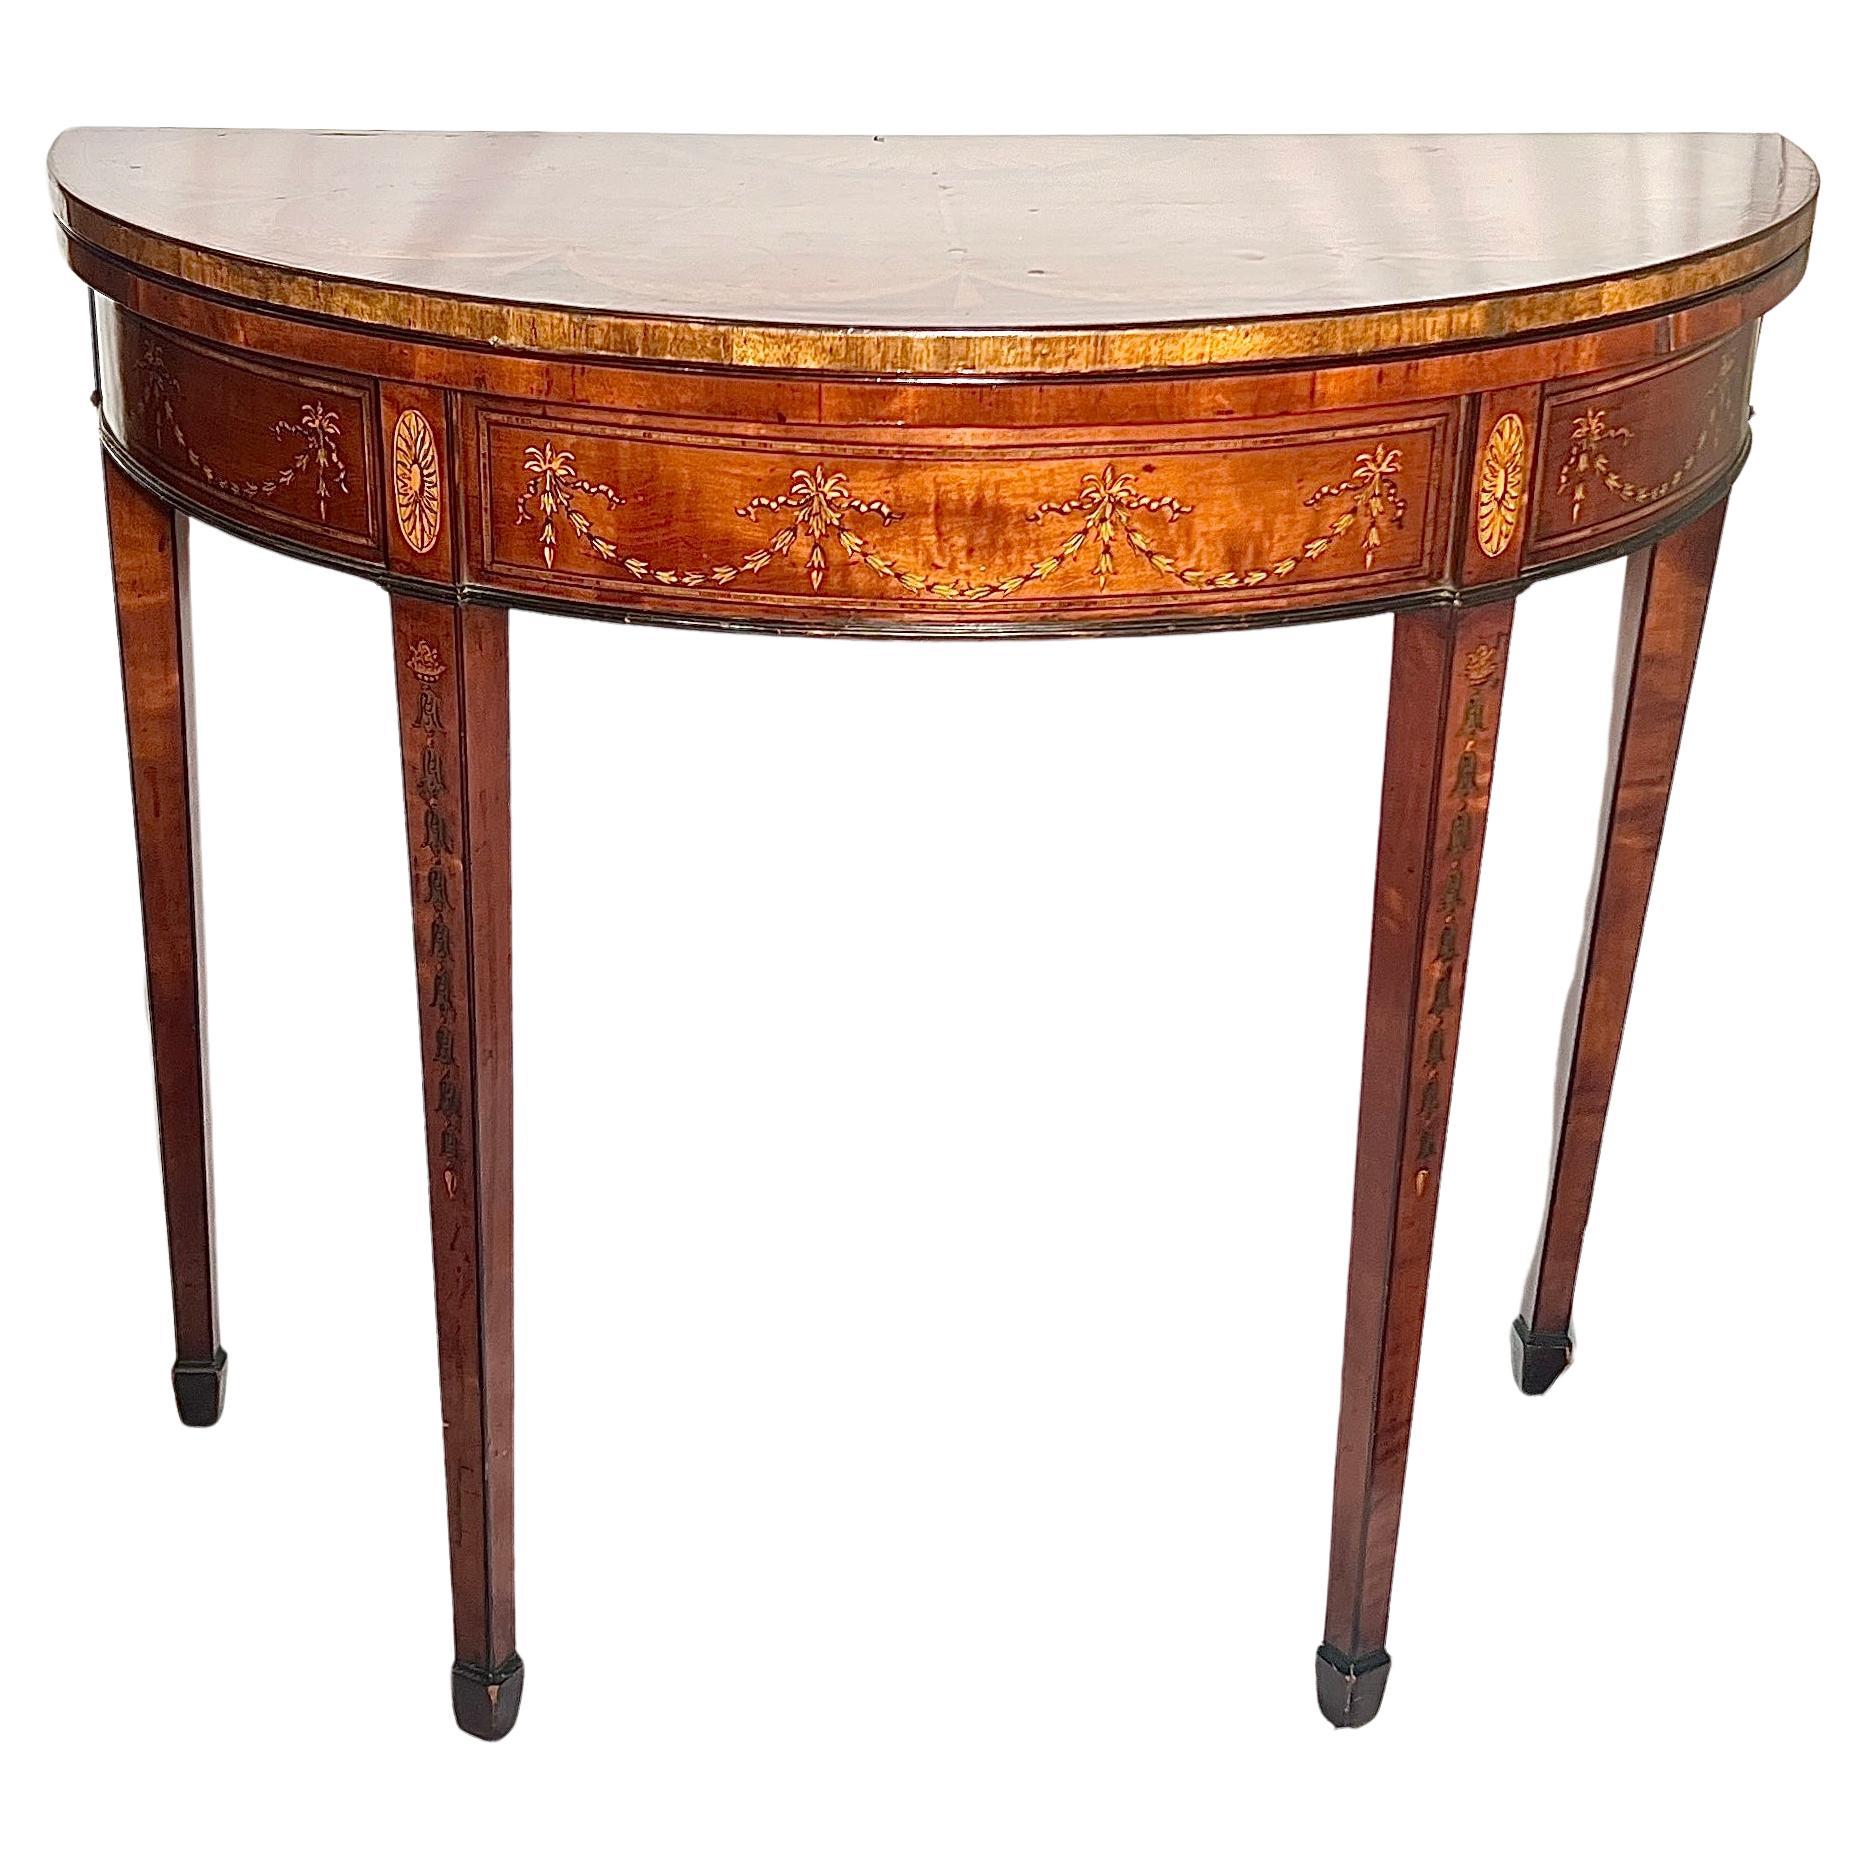 Antique English Mahogany & Satinwood Demi-lune Console Games Table, Circa 1890. For Sale